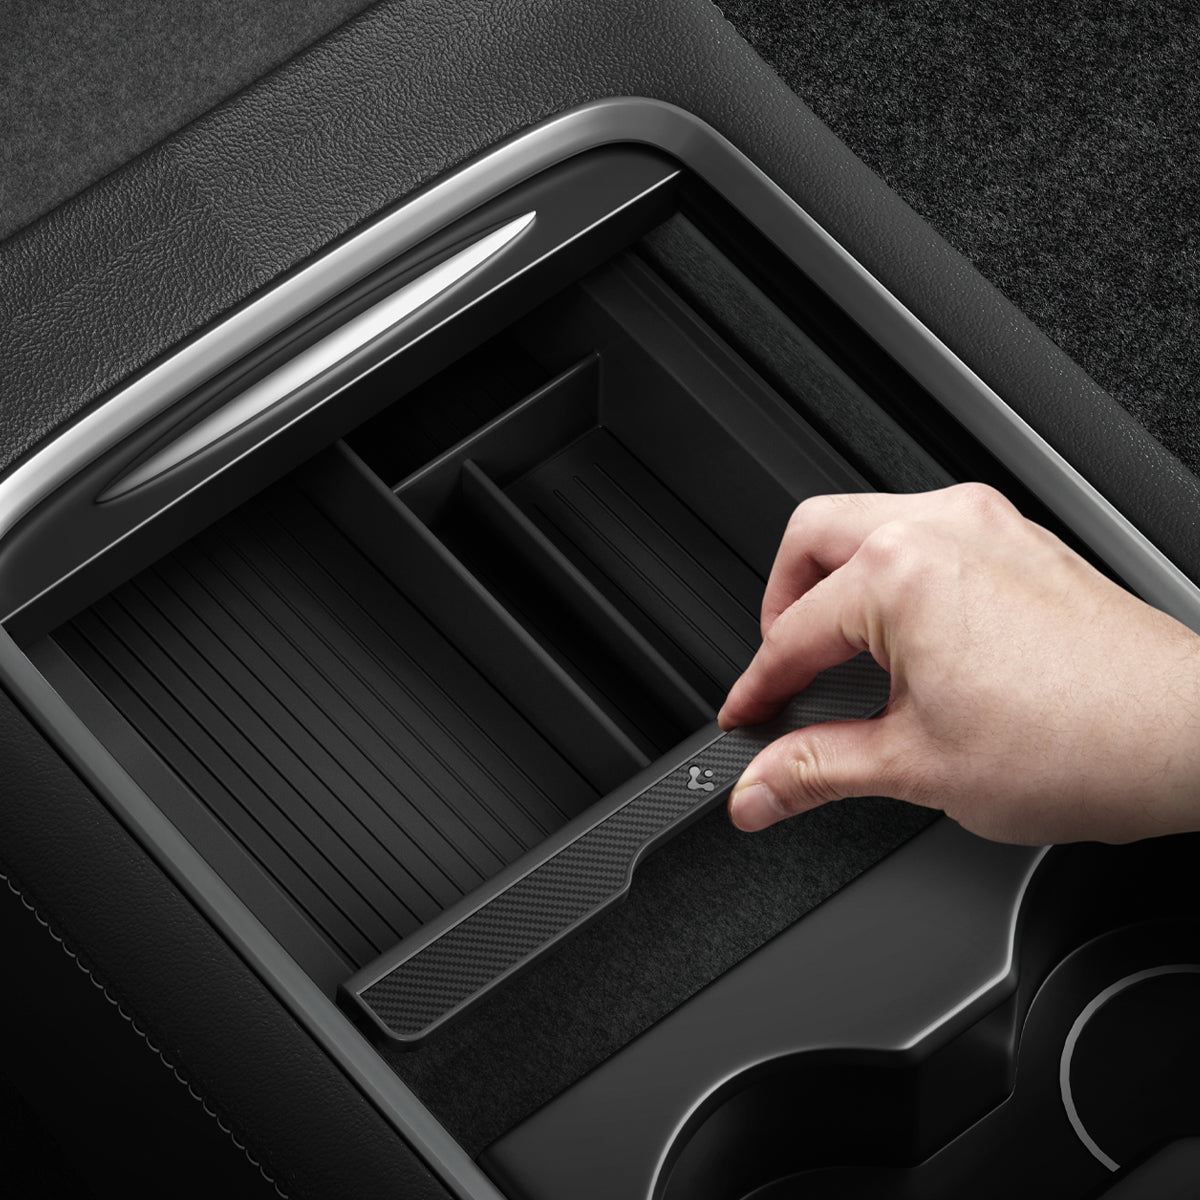 ACP04508 - Tesla Model y & 3 Center Console Organizer Tray in black showing a hand installing it inside the car